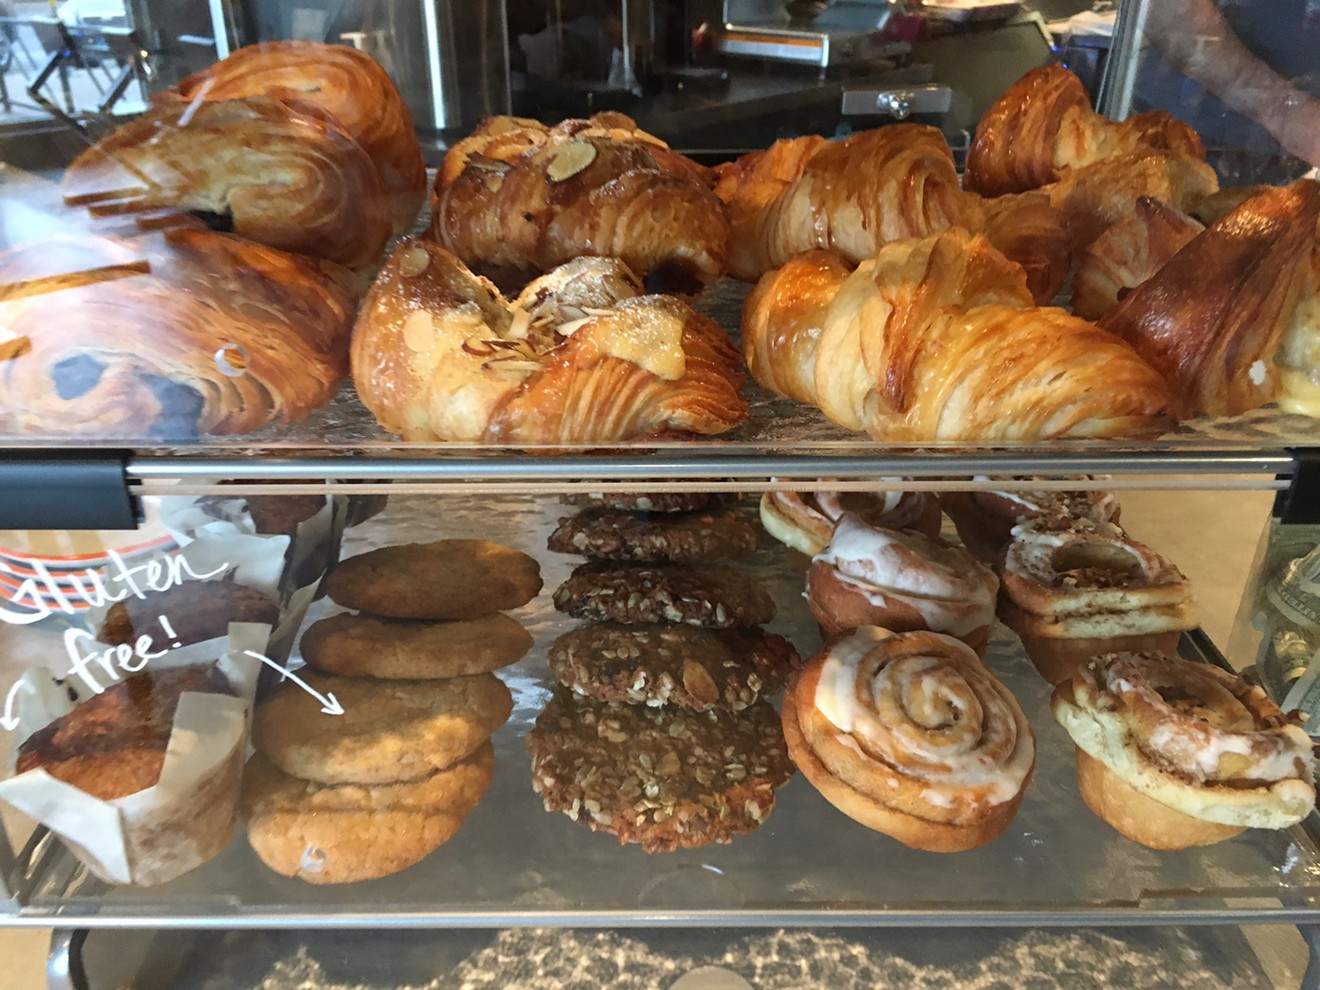 Trail Mix Cookie aside, all pastries sold at Cultivar Coffee's Oak Cliff location are sourced from La Casita, a new business launched by Small Brewpub's pastry chef, Maricsa Trejo.